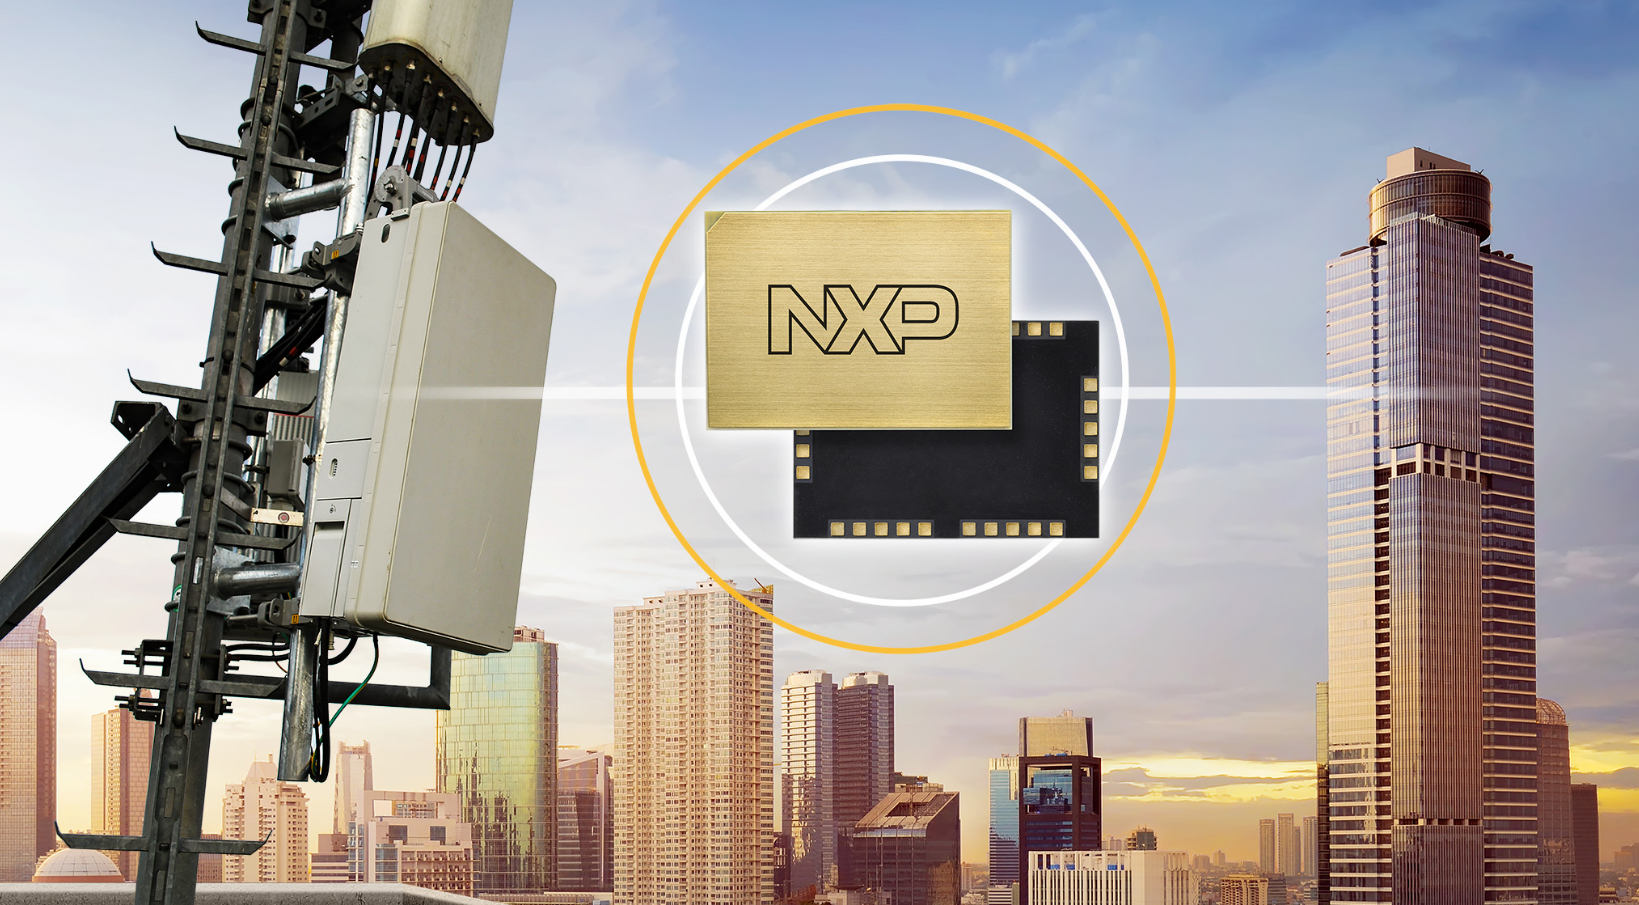 5G Radios Shrink With NXP’s New Top-Side Cooling For RF Power